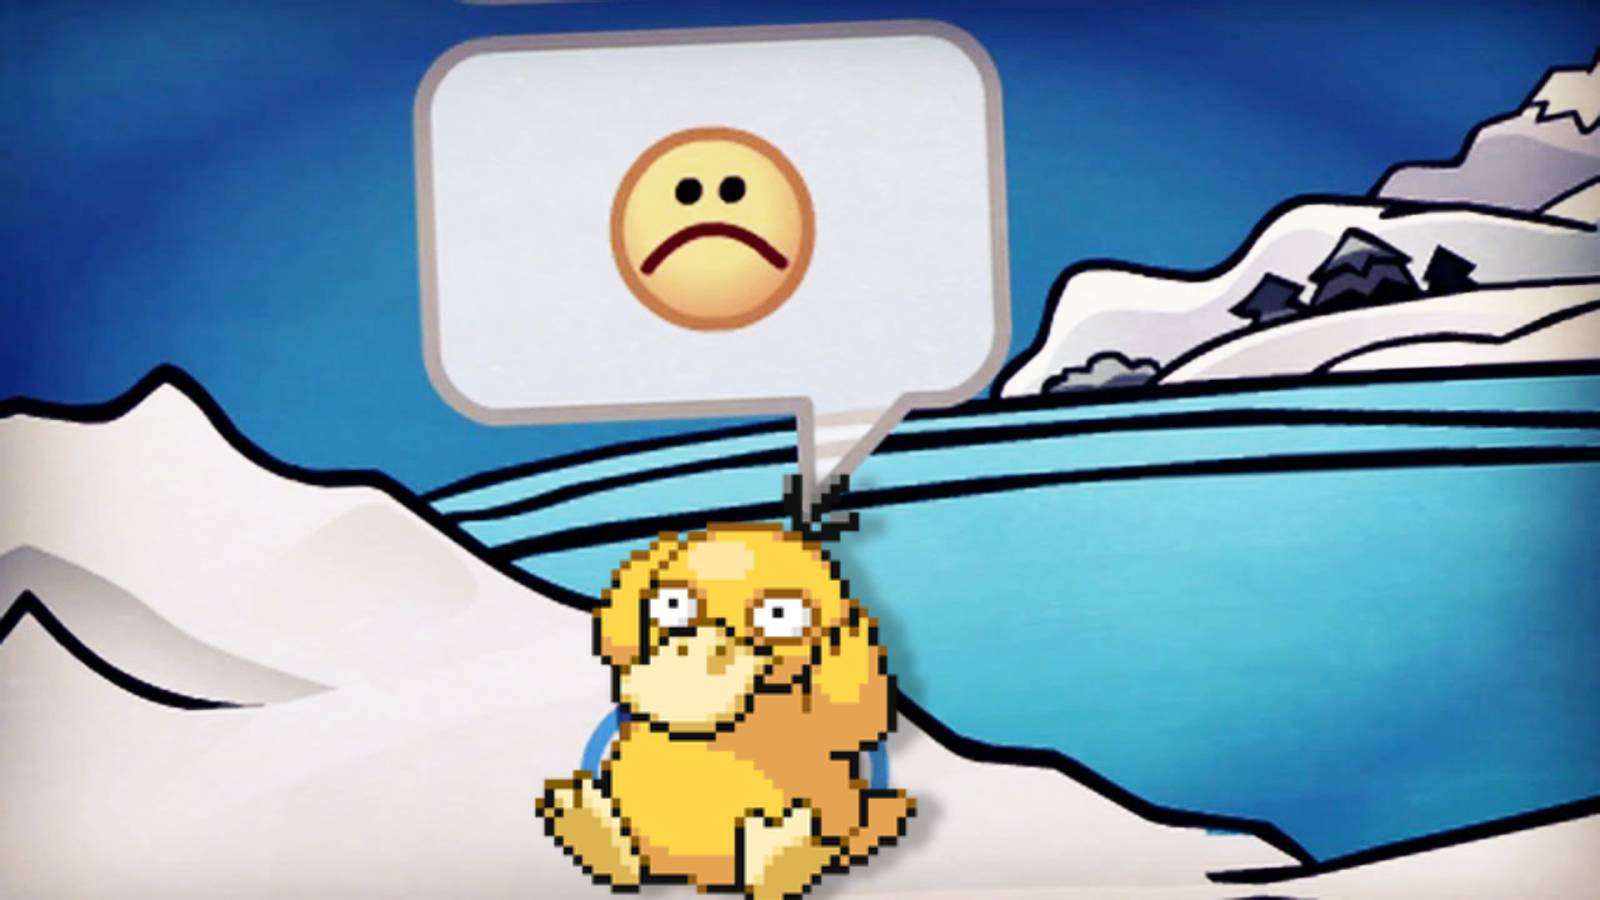 A pixelated Psyduck sits on a snow scene from Club Penguin, with a sad face emoji appearing in a thought bubble above them